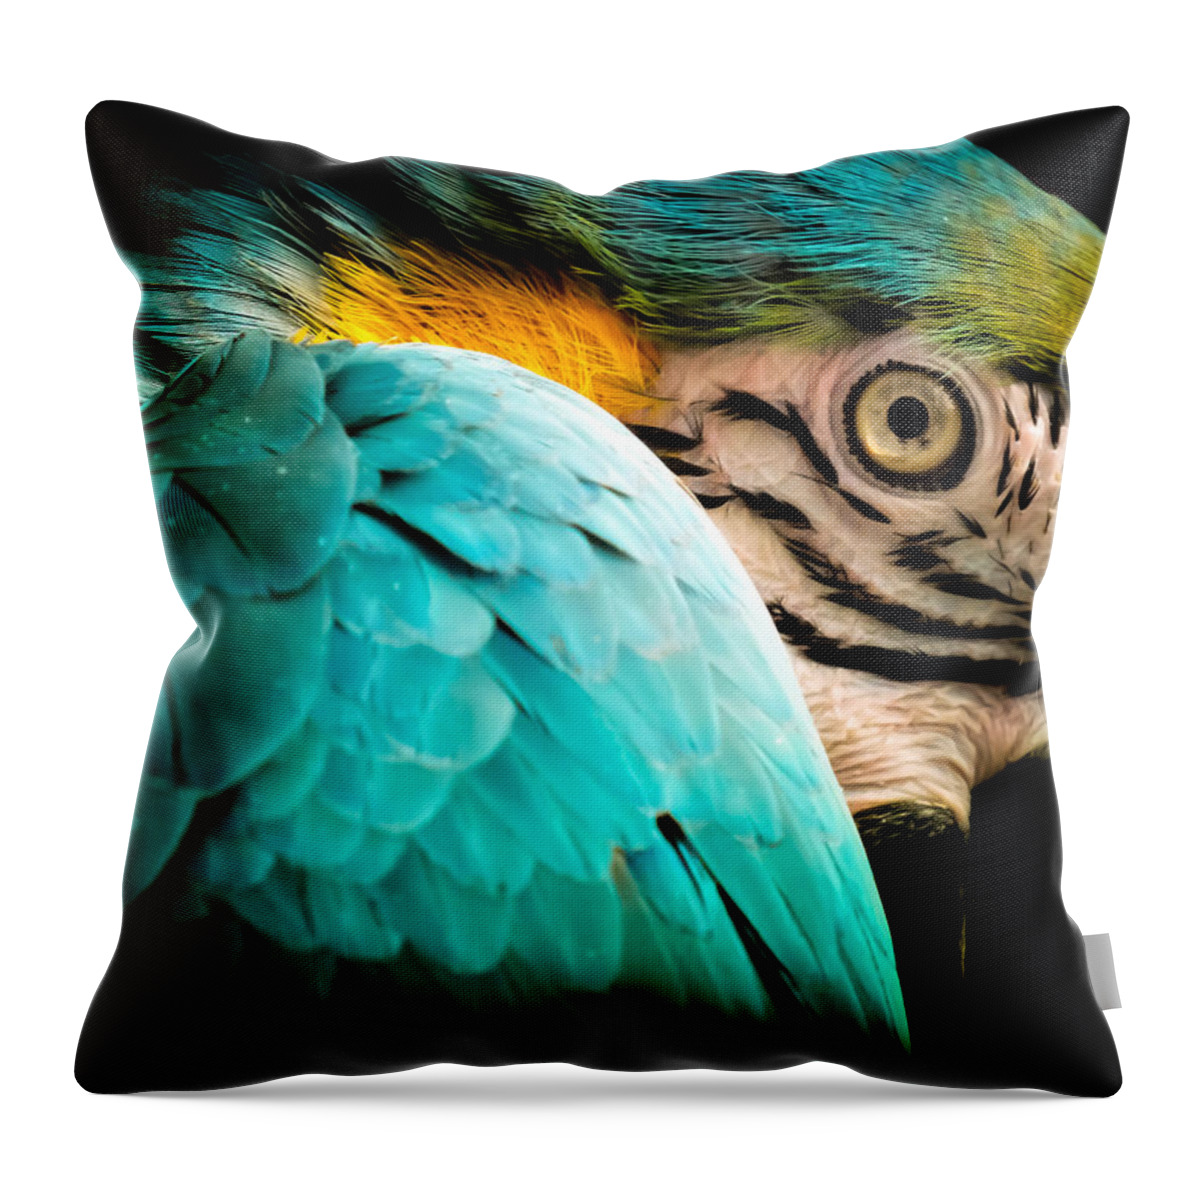 Macaws Throw Pillow featuring the photograph Sleeping Beauty by Karen Wiles